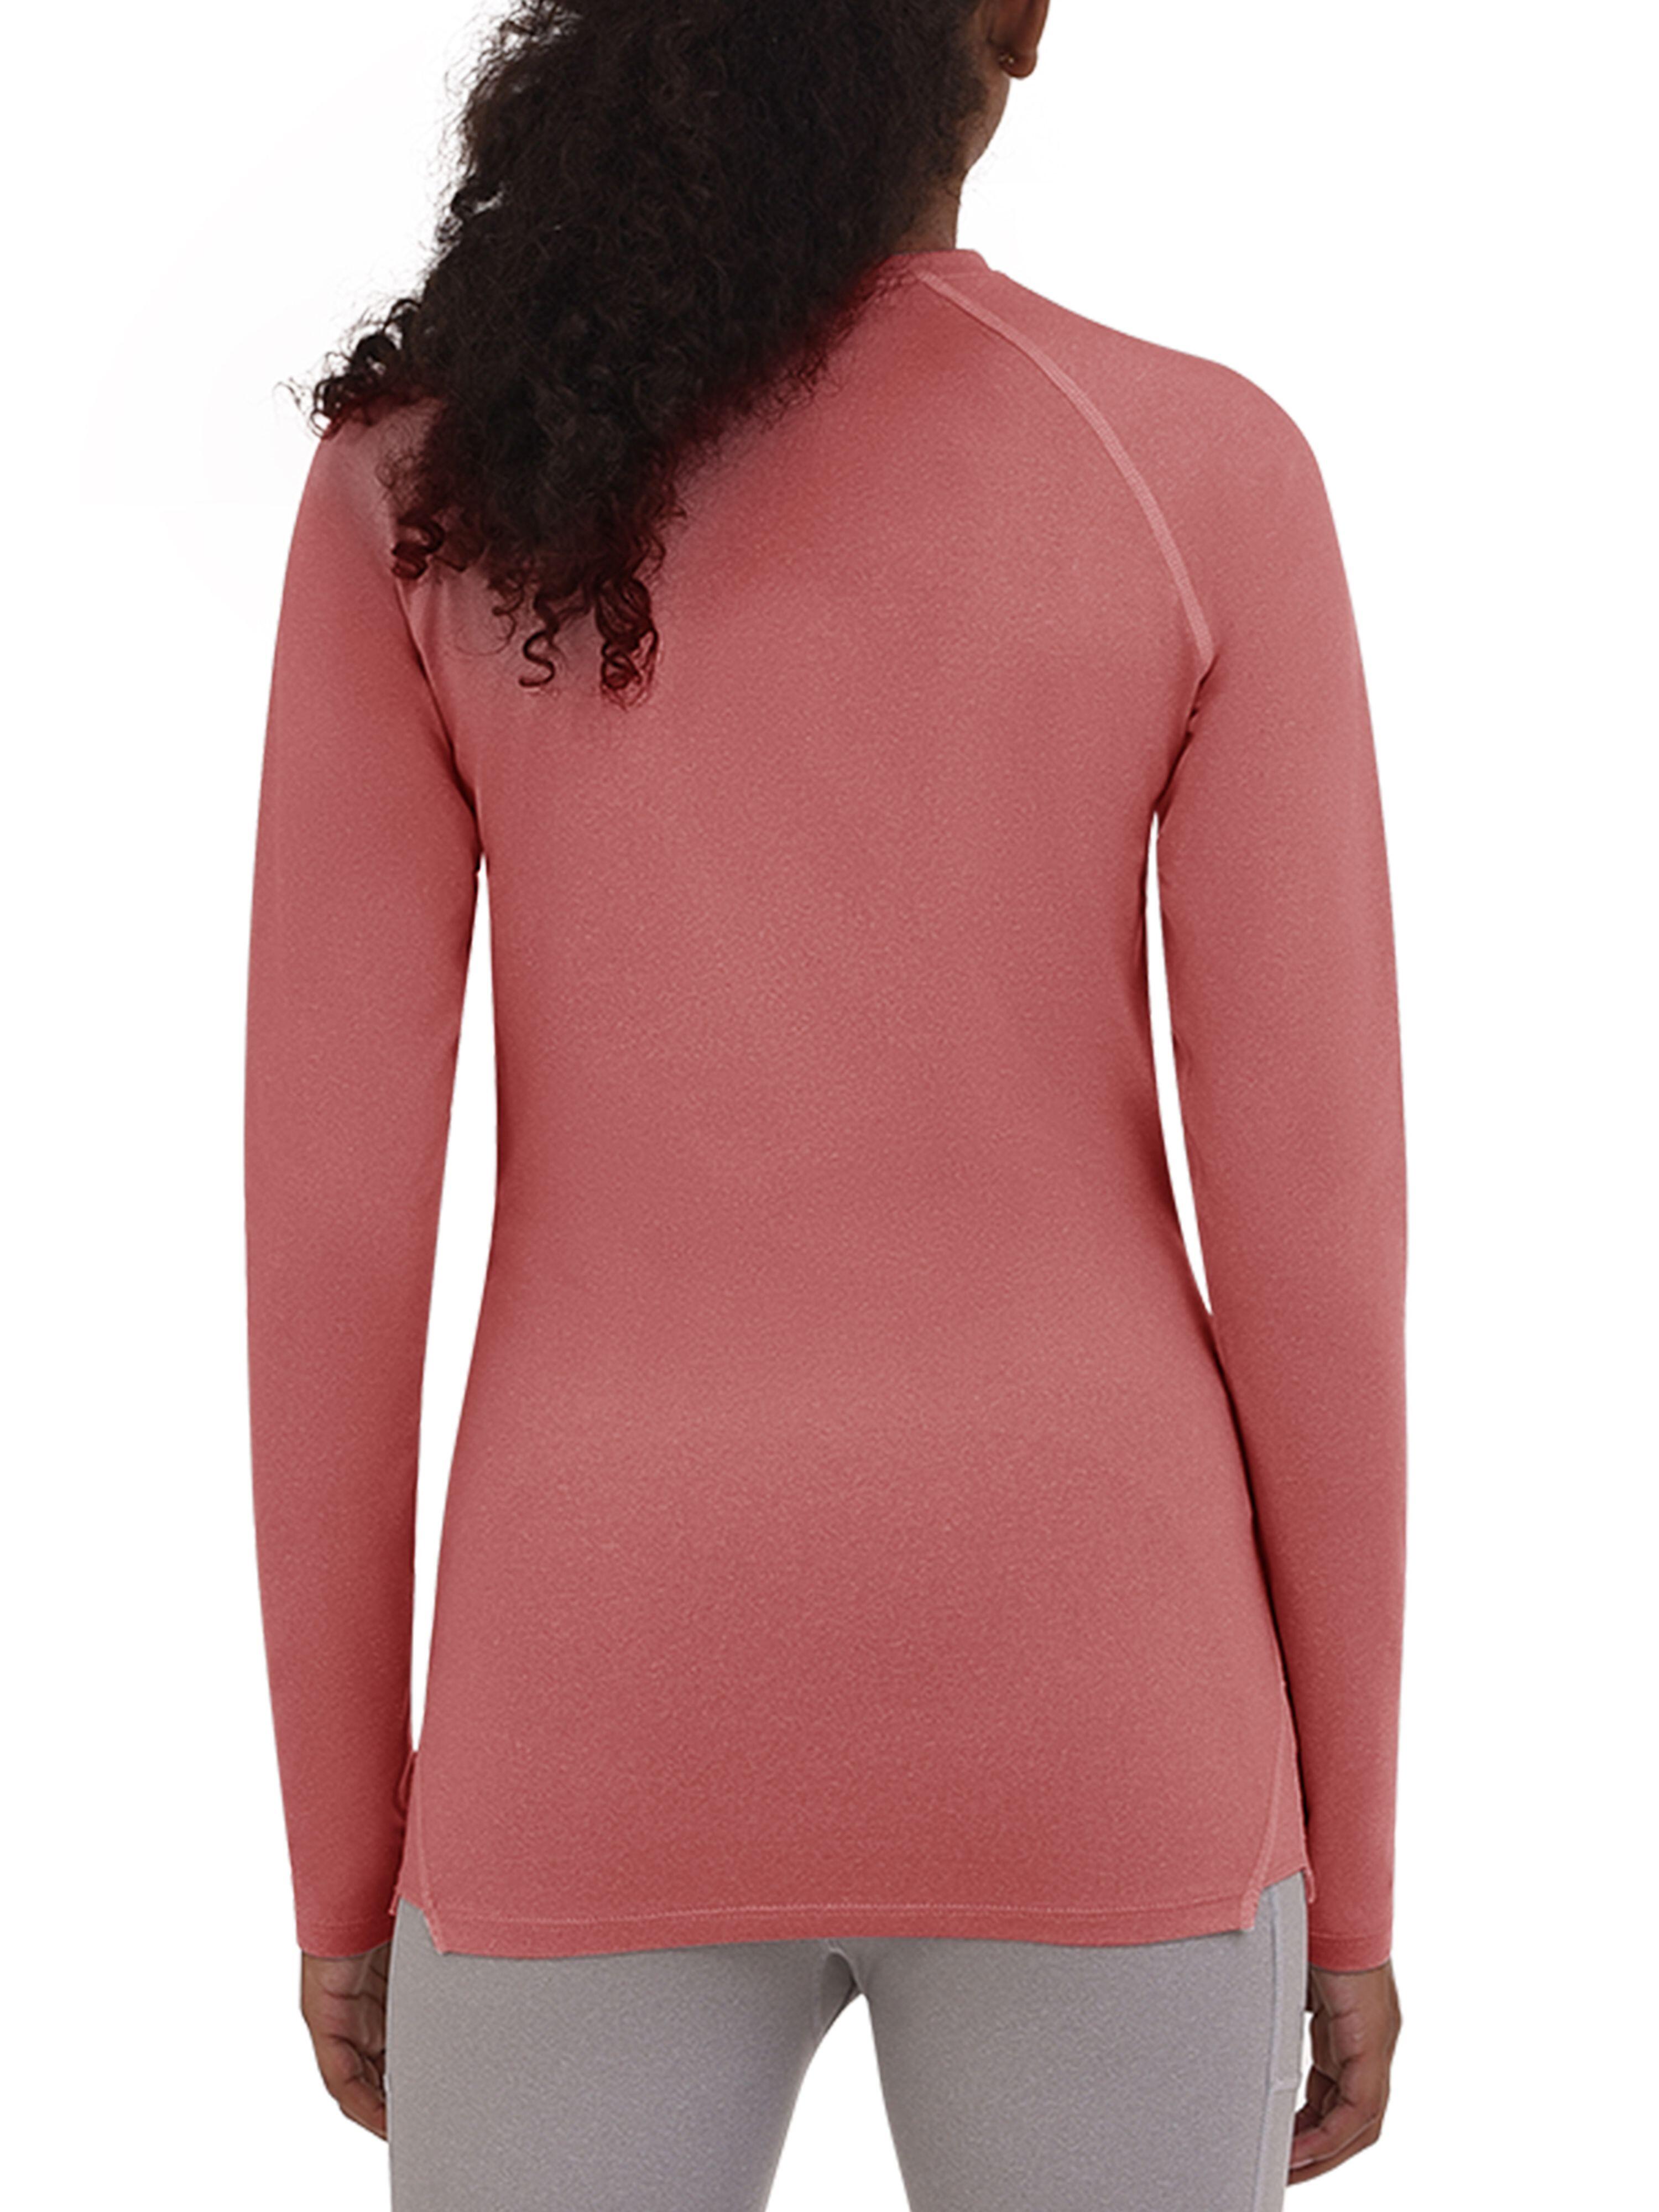 Girls' Super Thermal Base Layer Top - Dusty Rose Marl 3/5